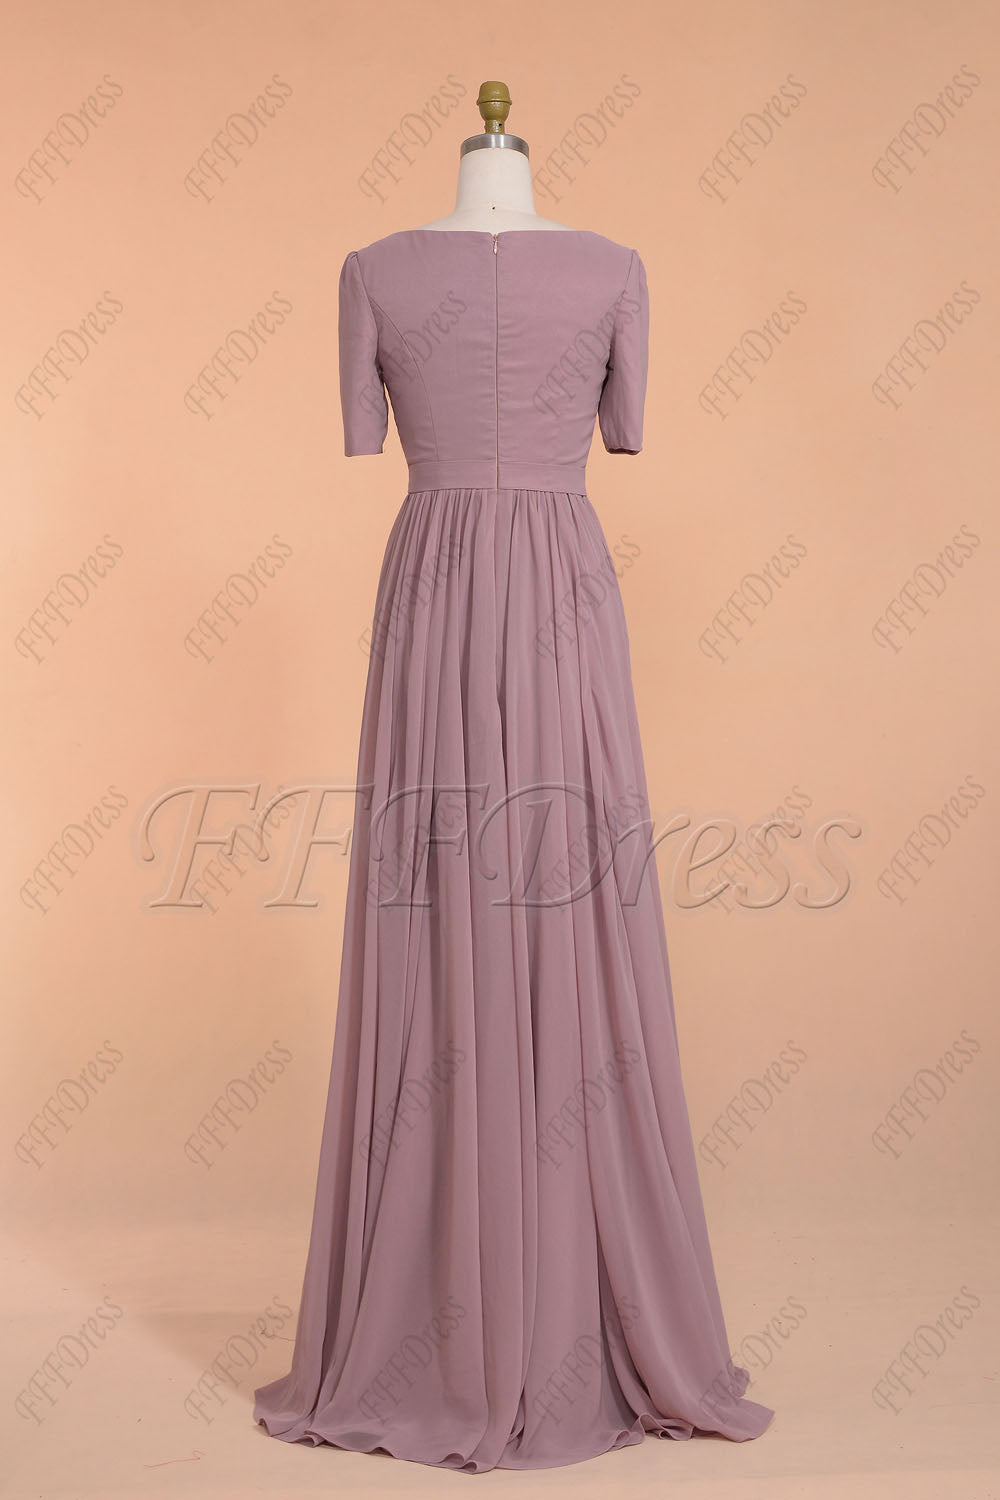 Dusty rose beaded modest slitted bridesmaid dress with sleeves